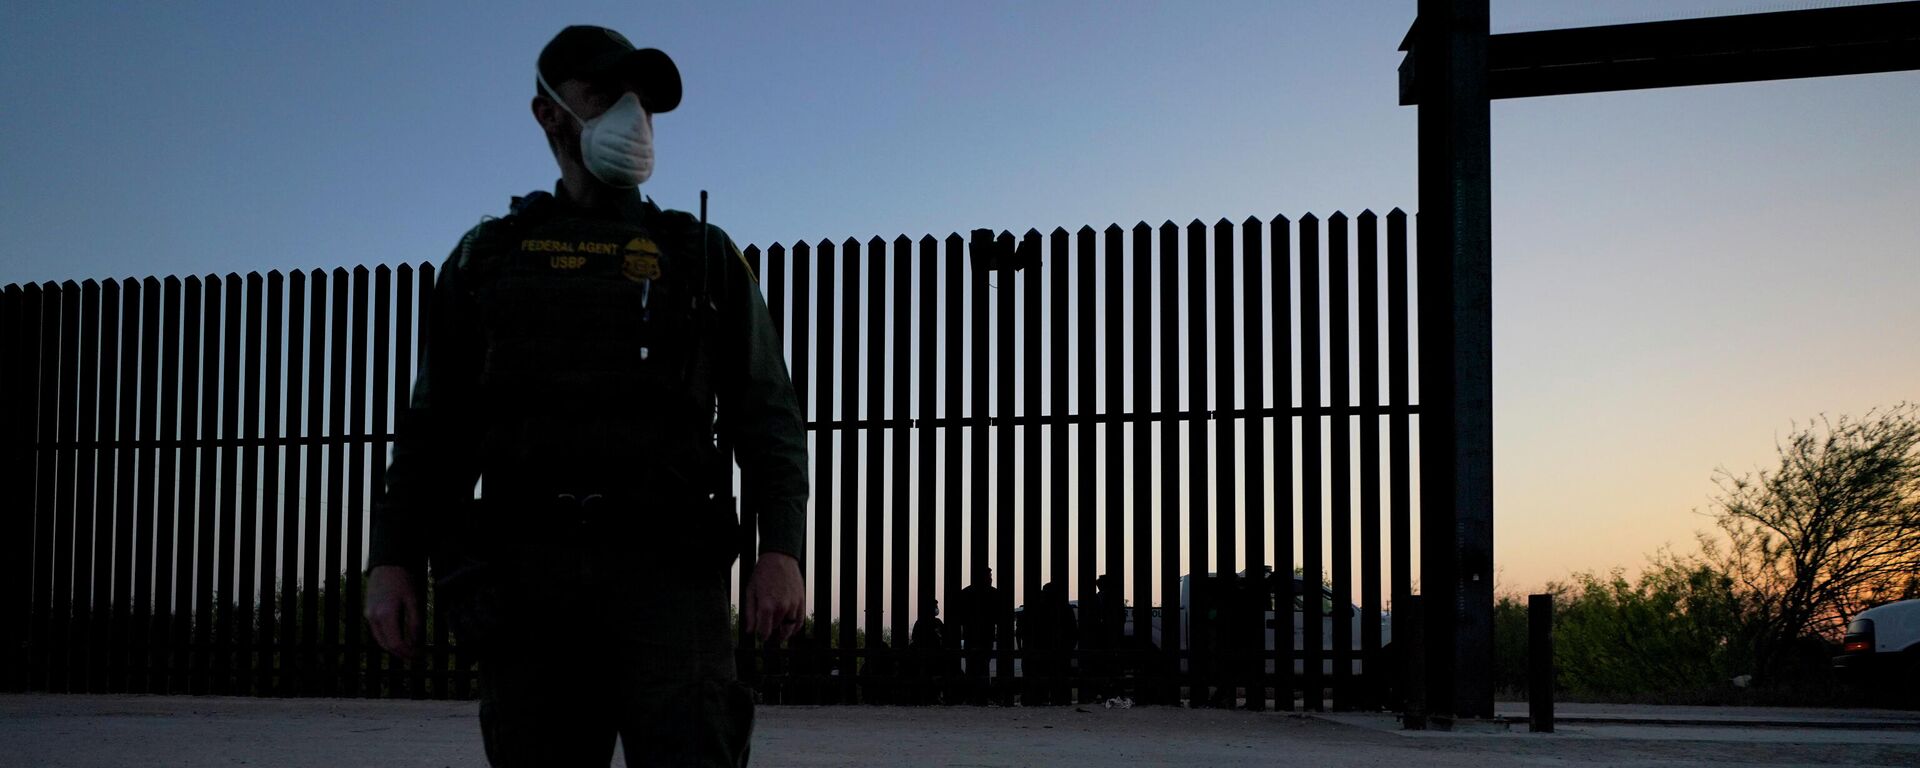 In this March 21, 2021 file photo, a U.S. Customs and Border Protection agent looks on near a gate on the U.S.-Mexico border wall as agents take migrants into custody, in Abram-Perezville, Texas. - Sputnik International, 1920, 26.02.2022